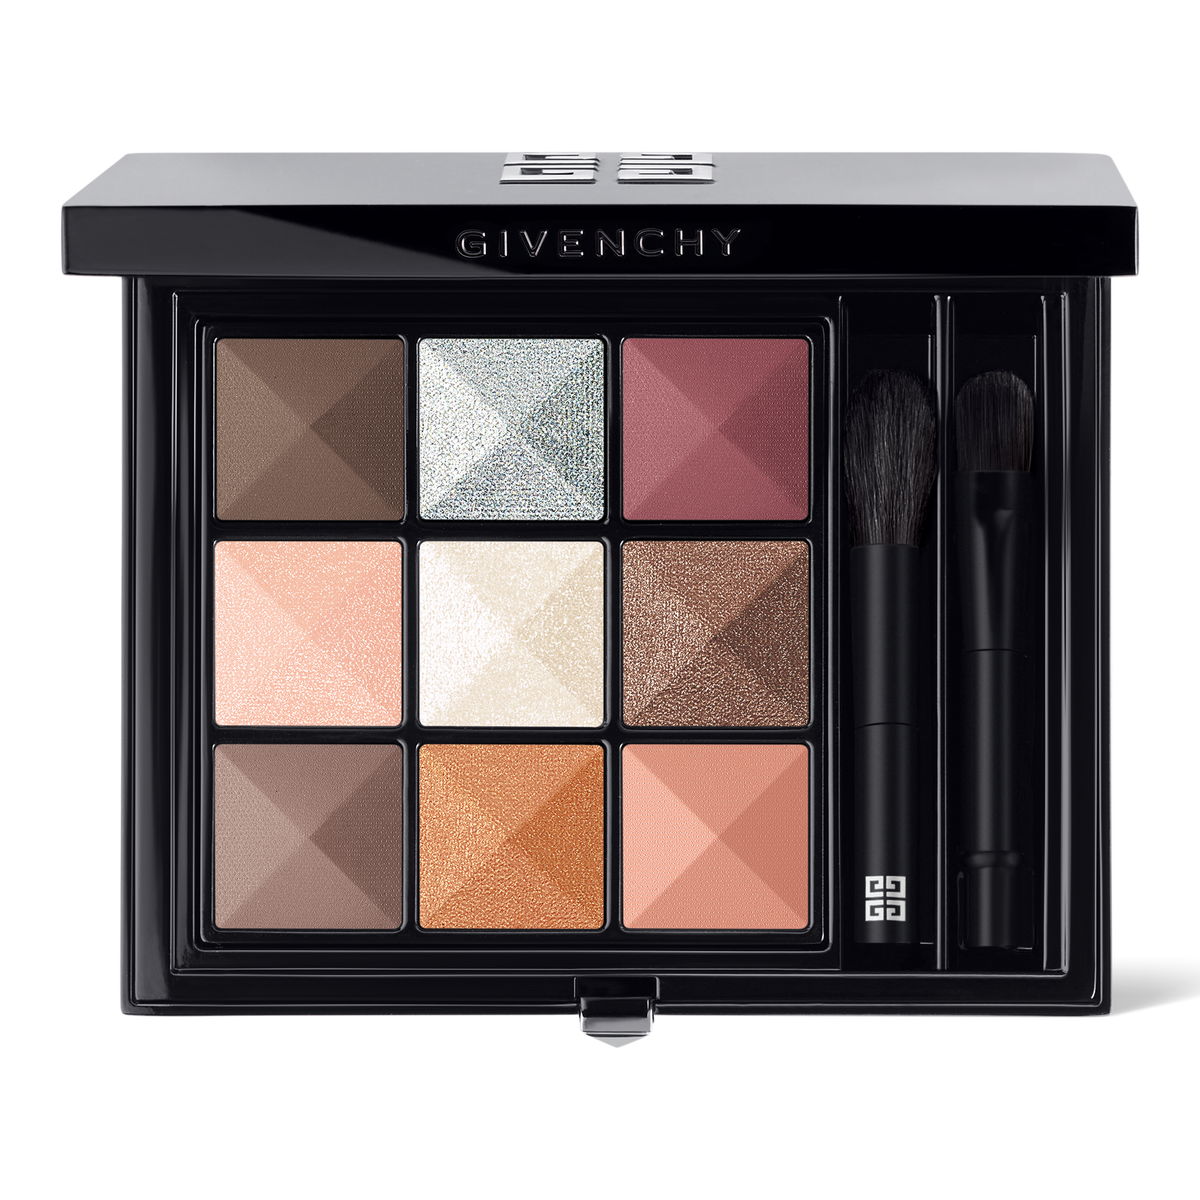 givenchy travel exclusive makeup palette price